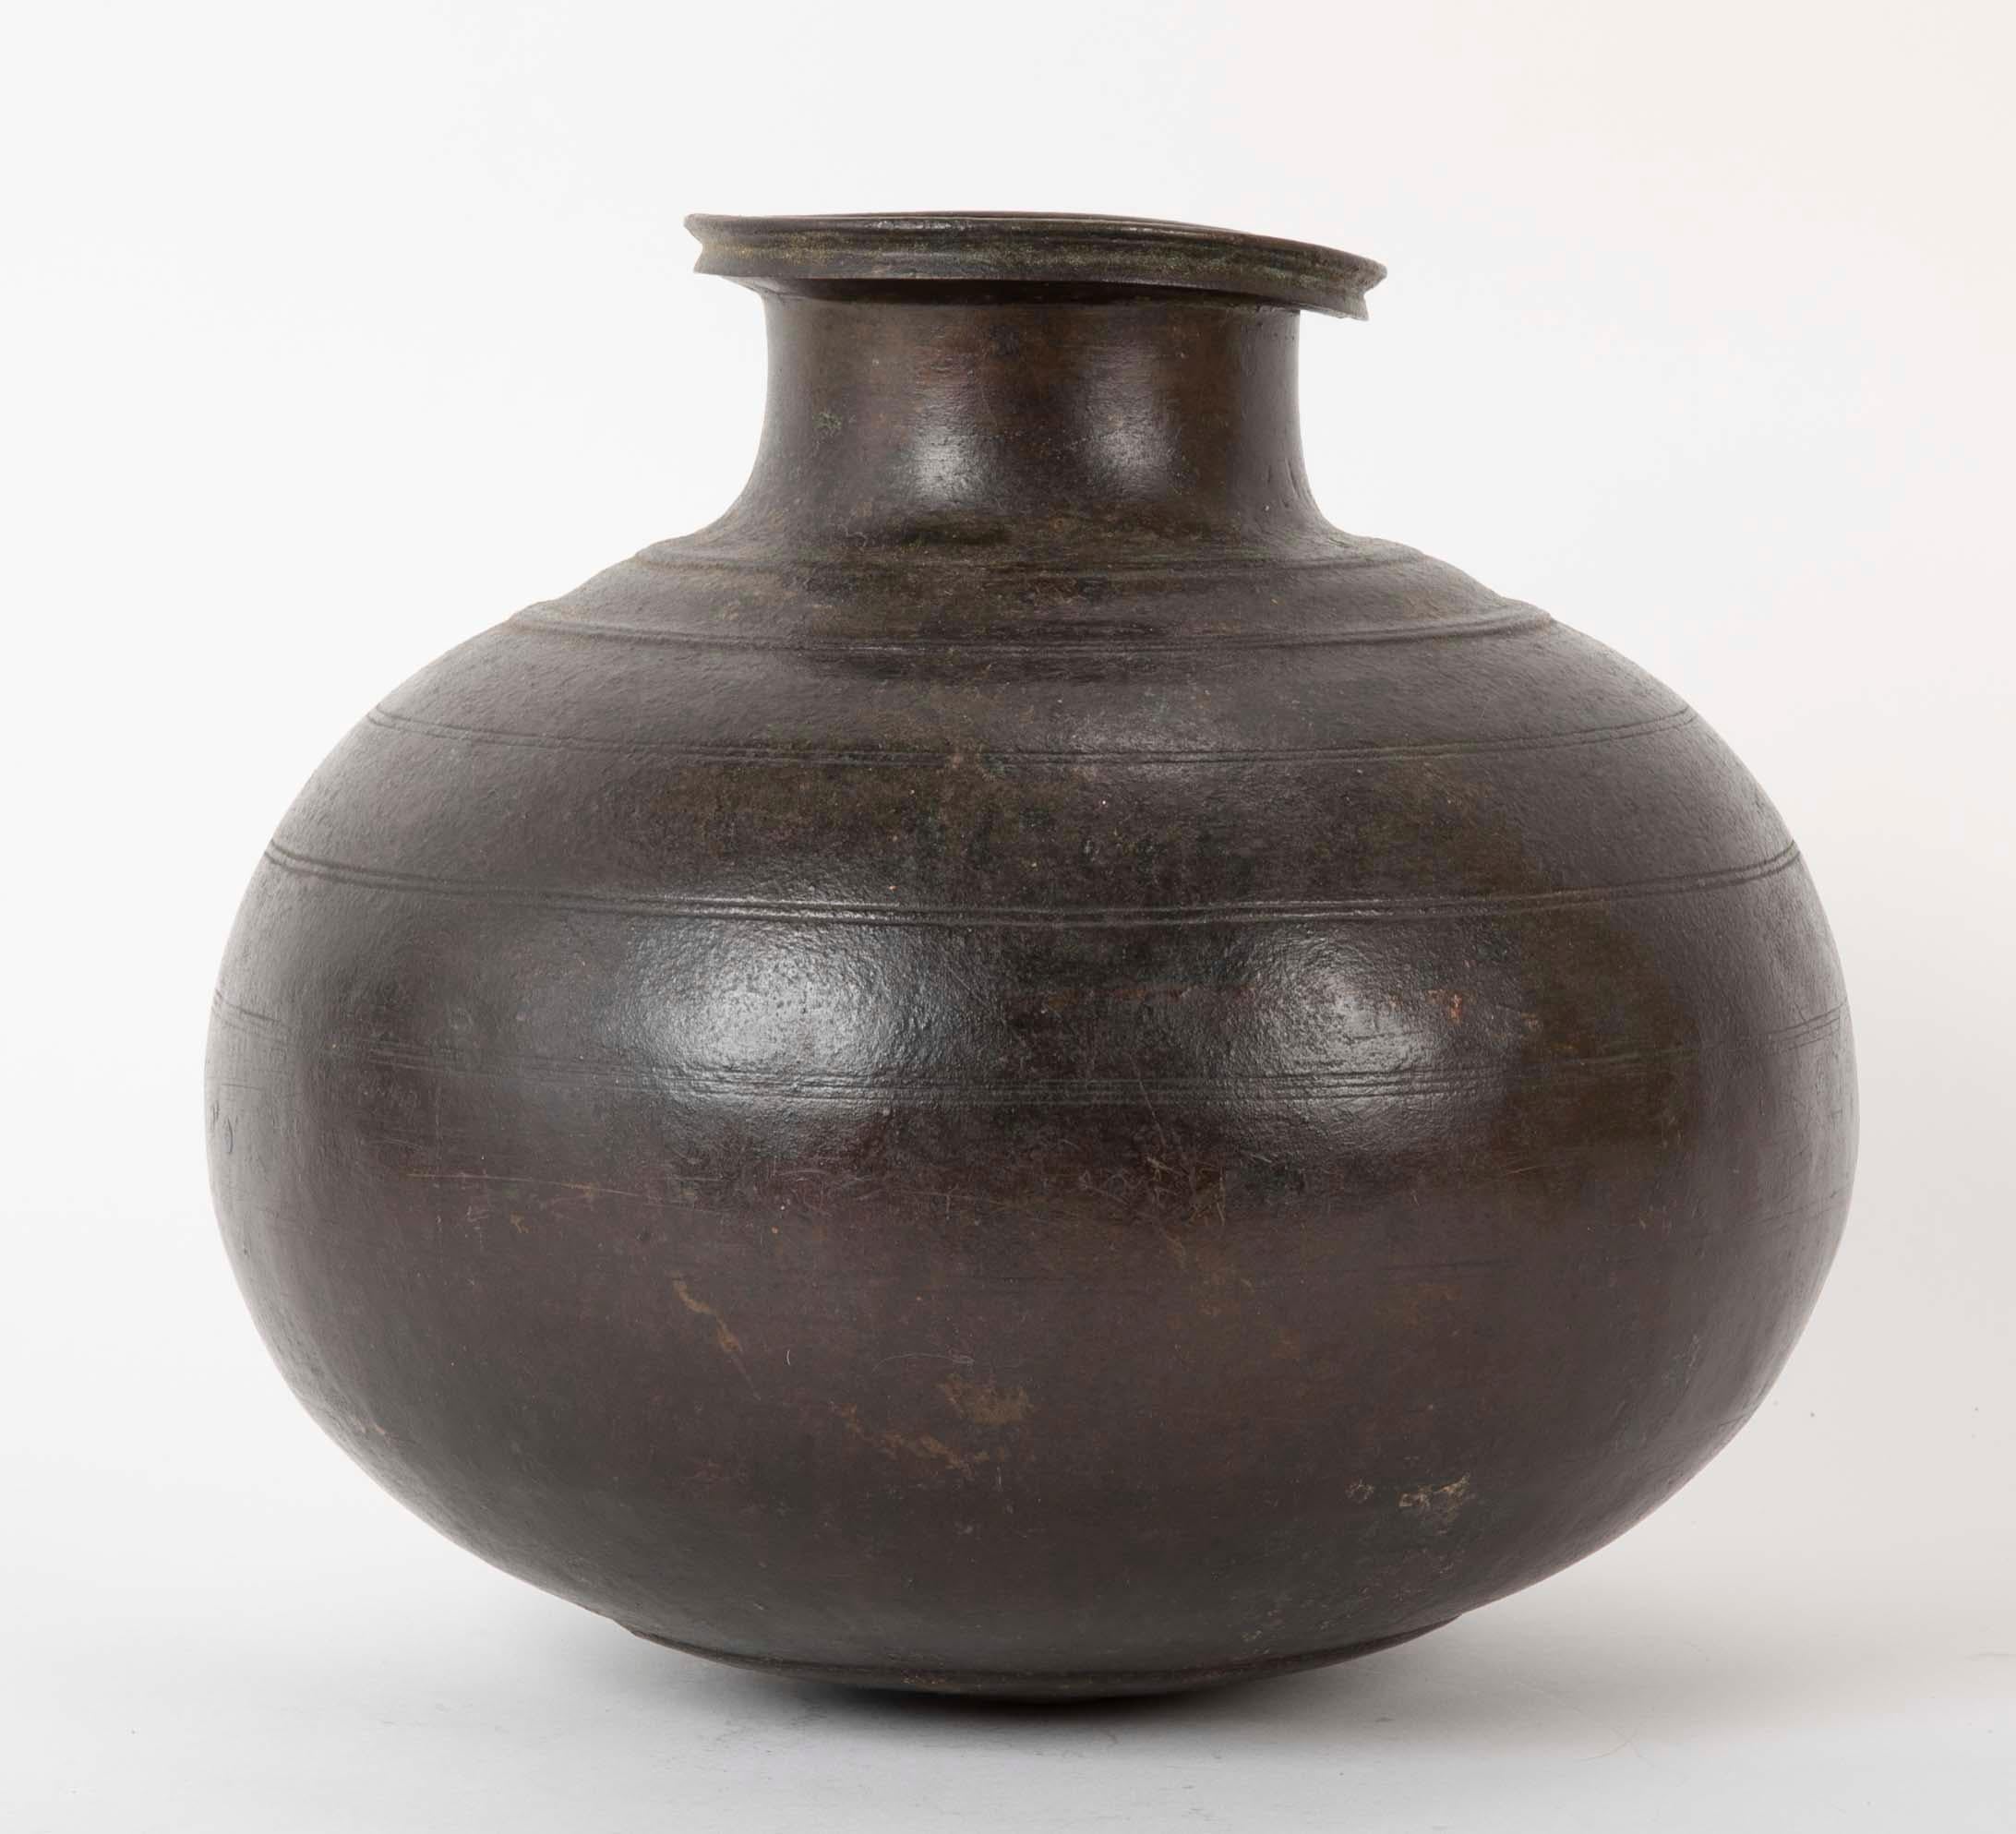 19th century (or earlier) Chinese bronze round wine or oil storage jar. The raised lip of the top dented on one side just adds some character to the piece. The body decorated with incised concentric circles. Deep chocolate patina.